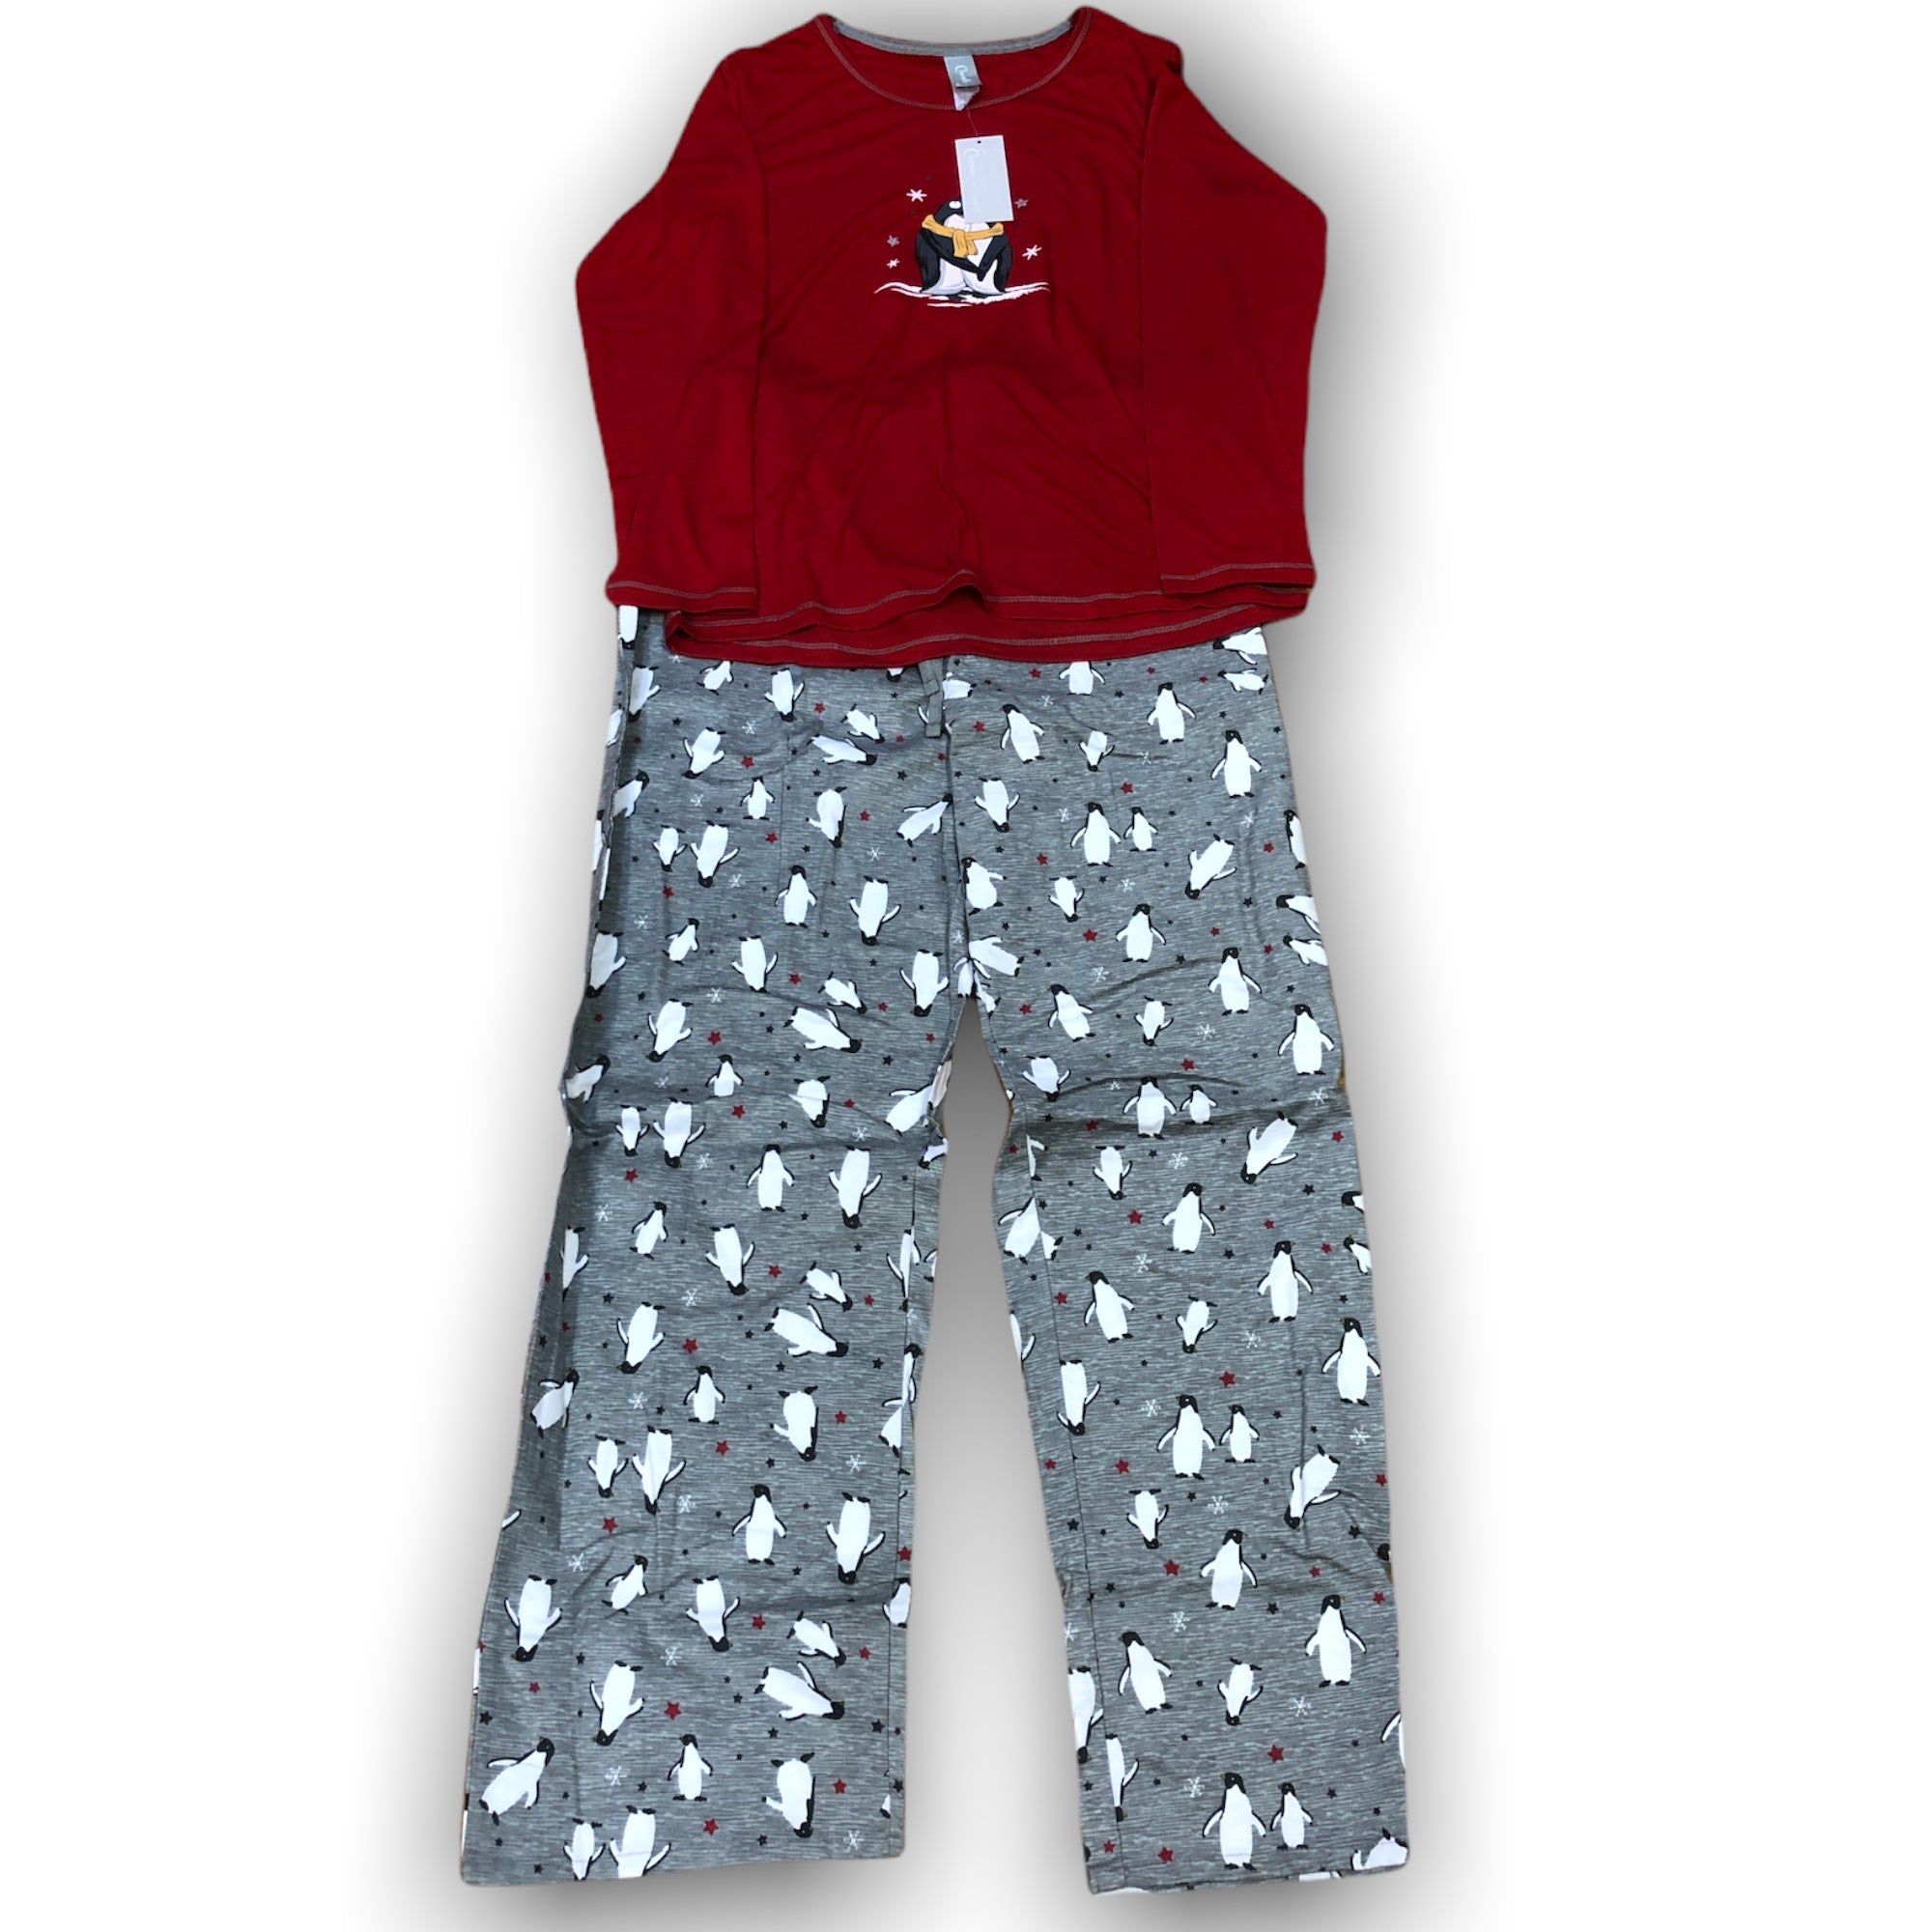 Women's Two Piece Pajama Set with Jersey Knit Top and Flannel Pants (GIFT PACKAGED)